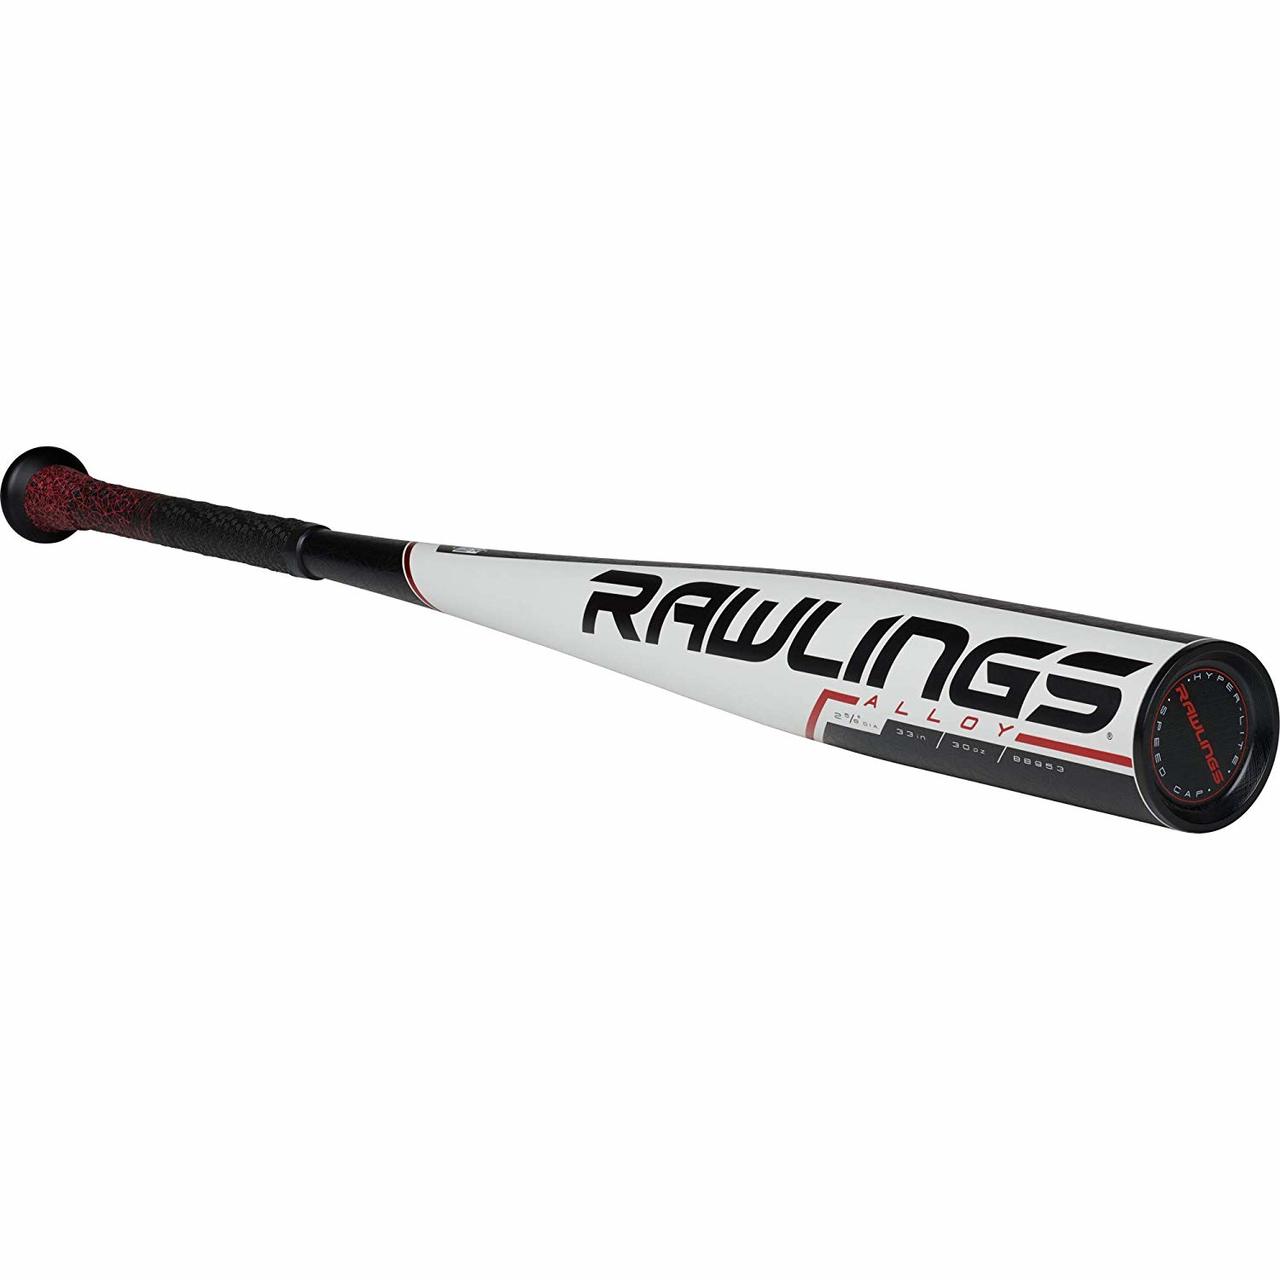 Aerospace-grade 5150 alloy is high-performing and ultra-durable Single-piece design is built to perform anywhere in the lineup Huge sweet spot to drive the ball on contact Redesigned barrel profile improves control PoP 2.0 technology to drive the ball on contact BBCOR .50 certified for NCAA and NFHS.